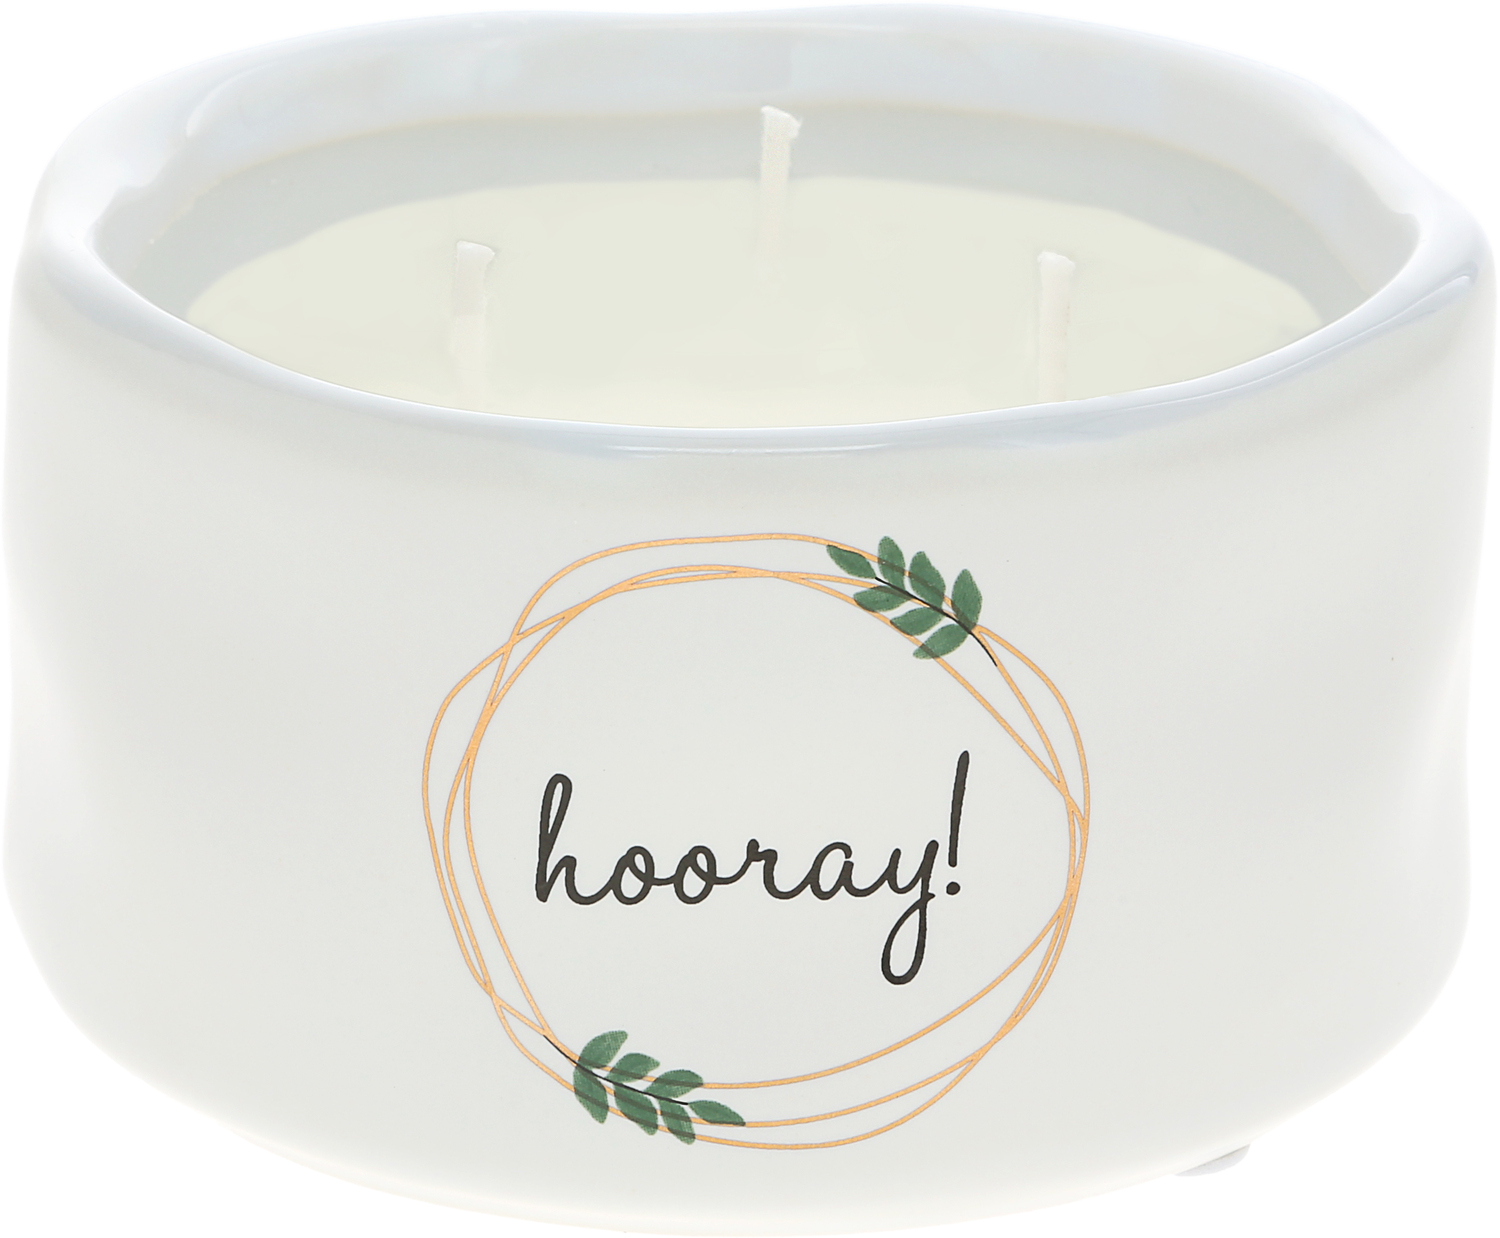 Hooray! by Love Grows - Hooray! - 8 oz - 100% Soy Wax Reveal Candle
Scent: Tranquility